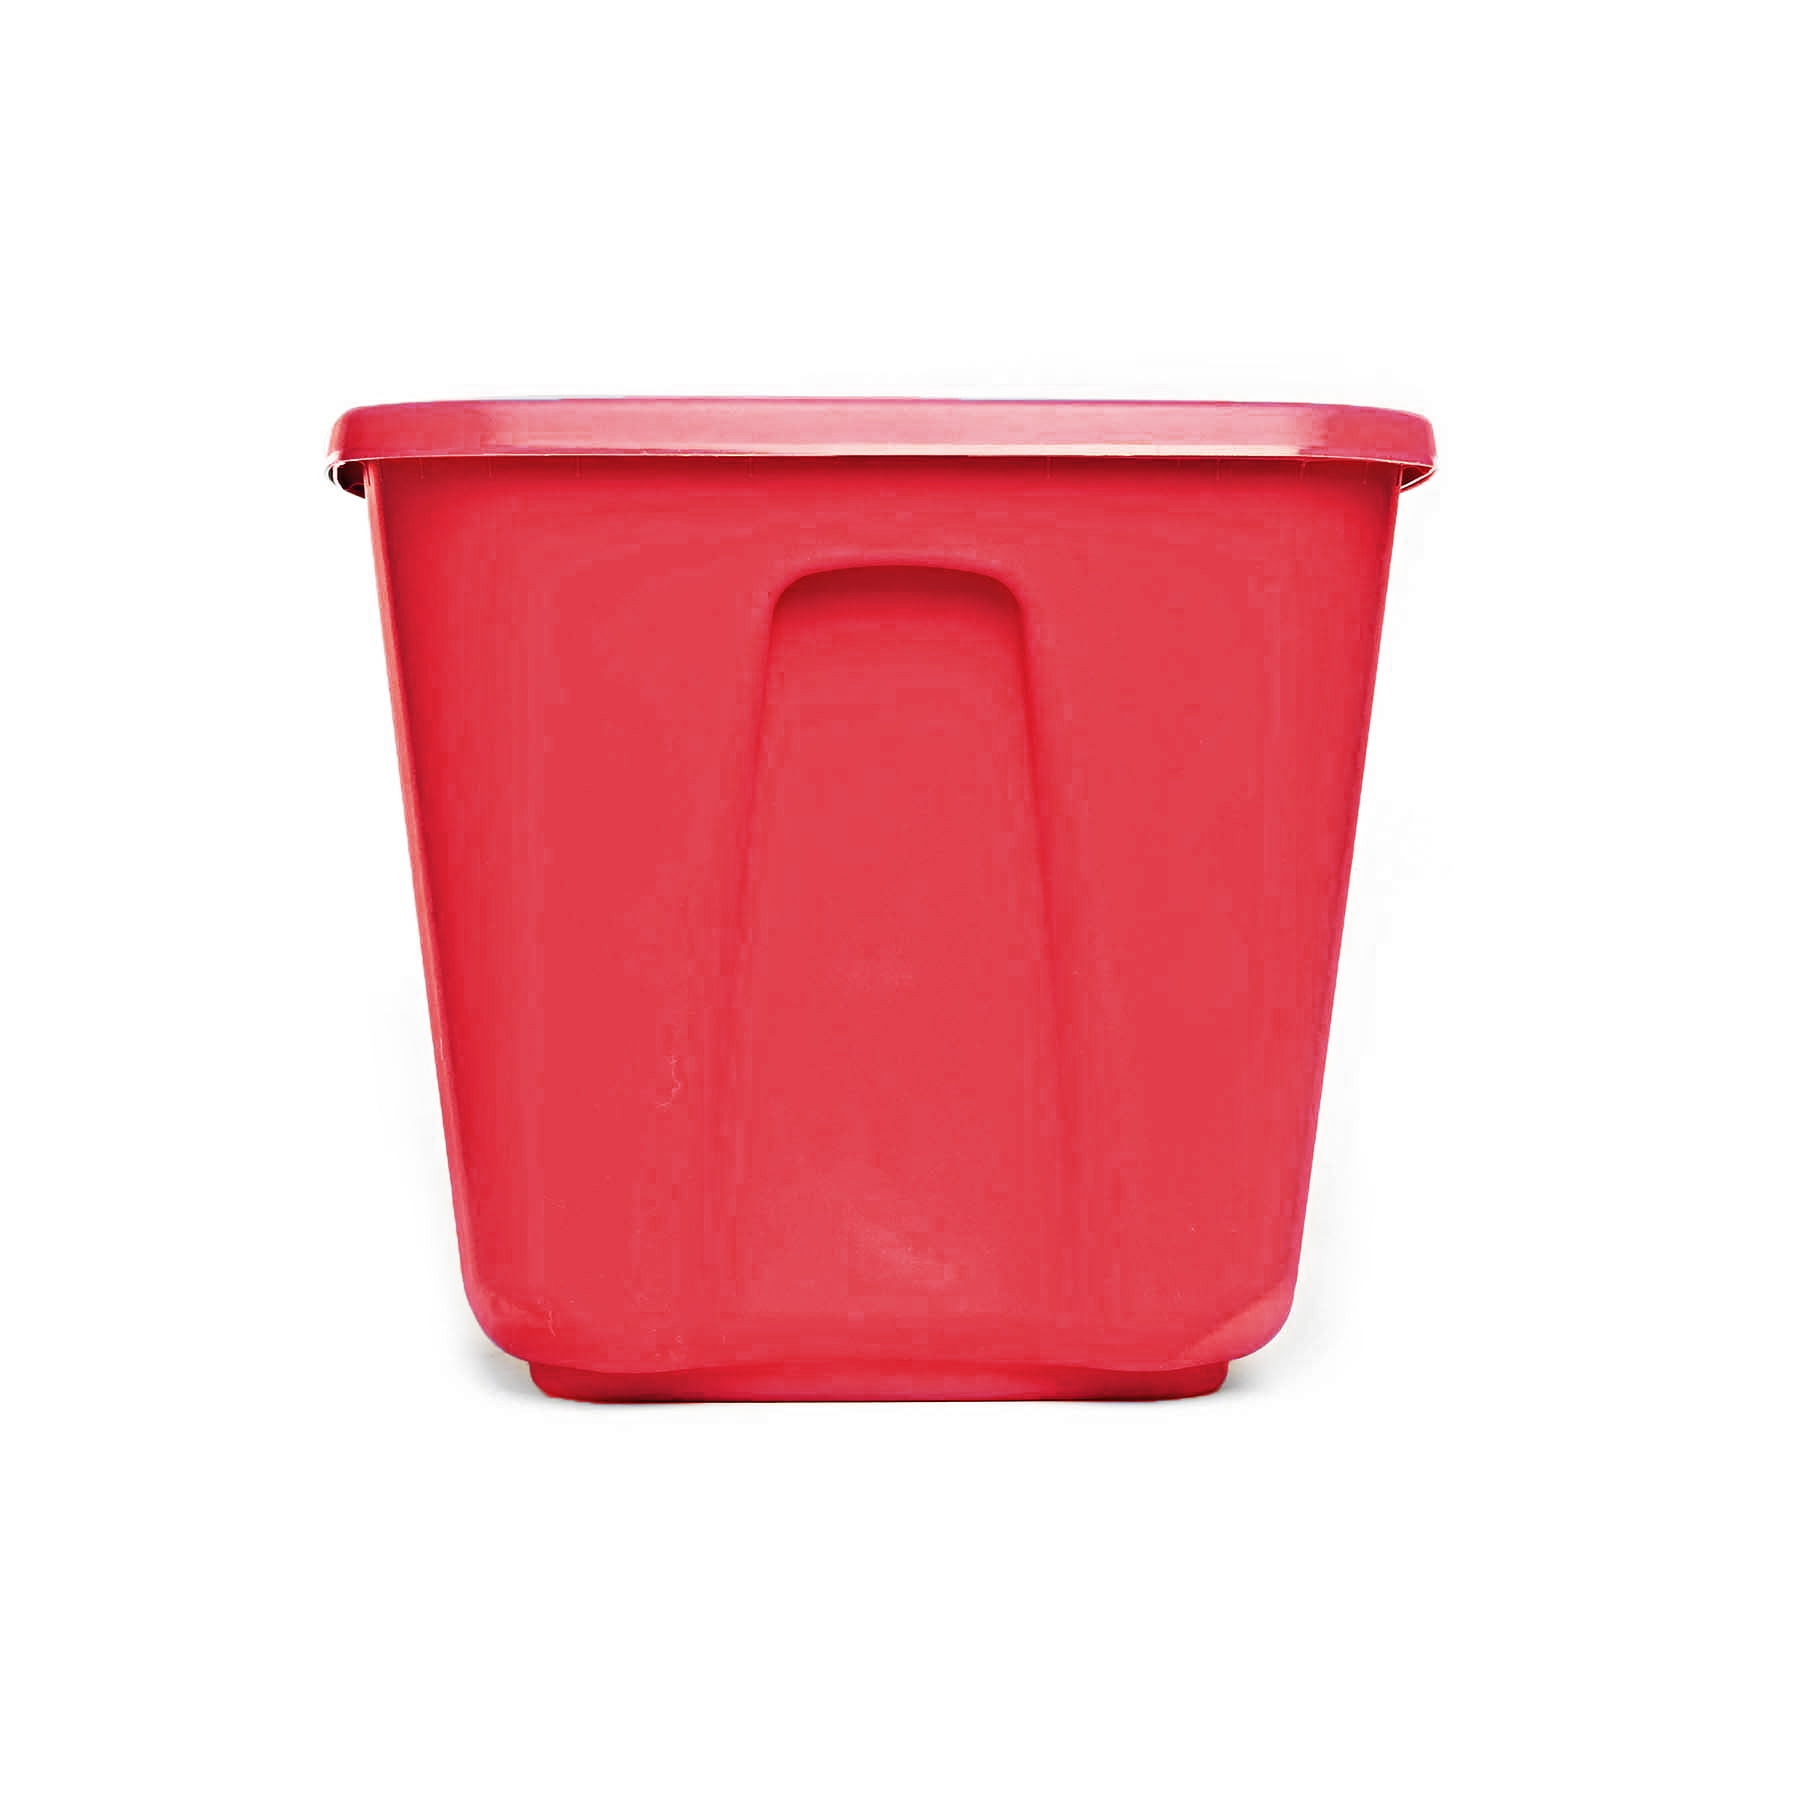 Homz 18 Gallon Holiday Plastic Storage Container, Red, Set of 4